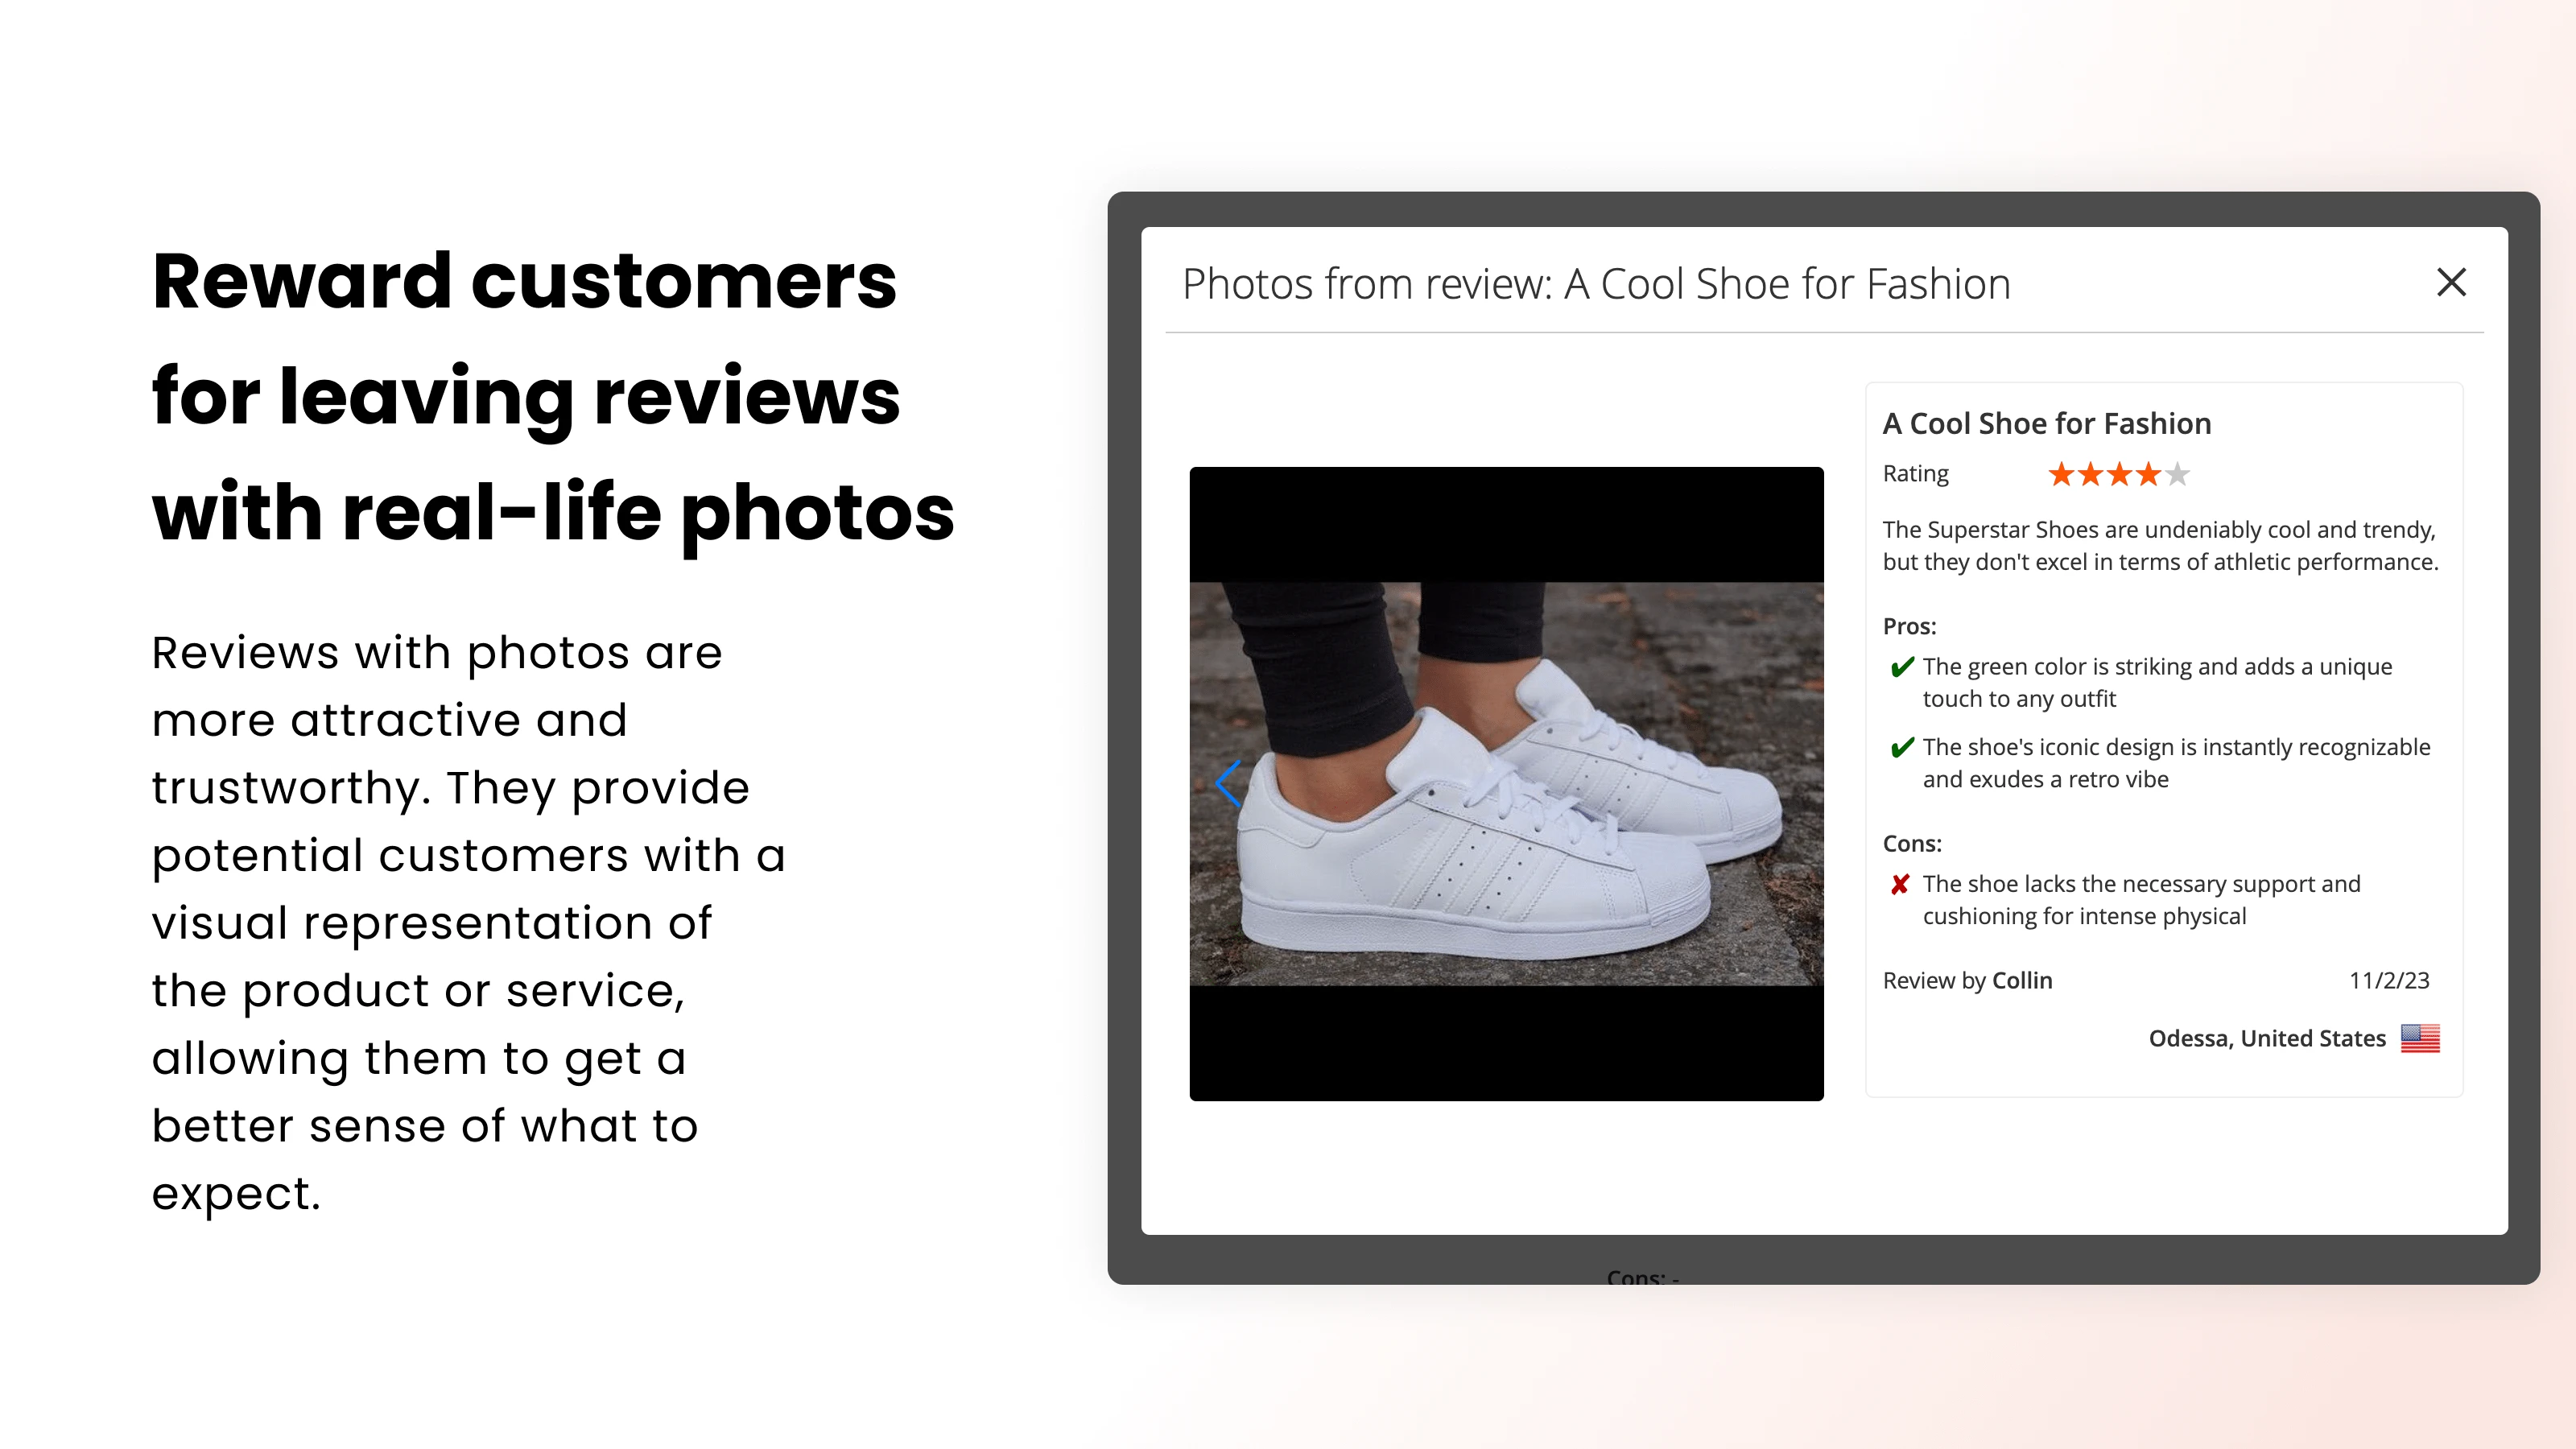 Reward customers for leaving reviews with real-life photos